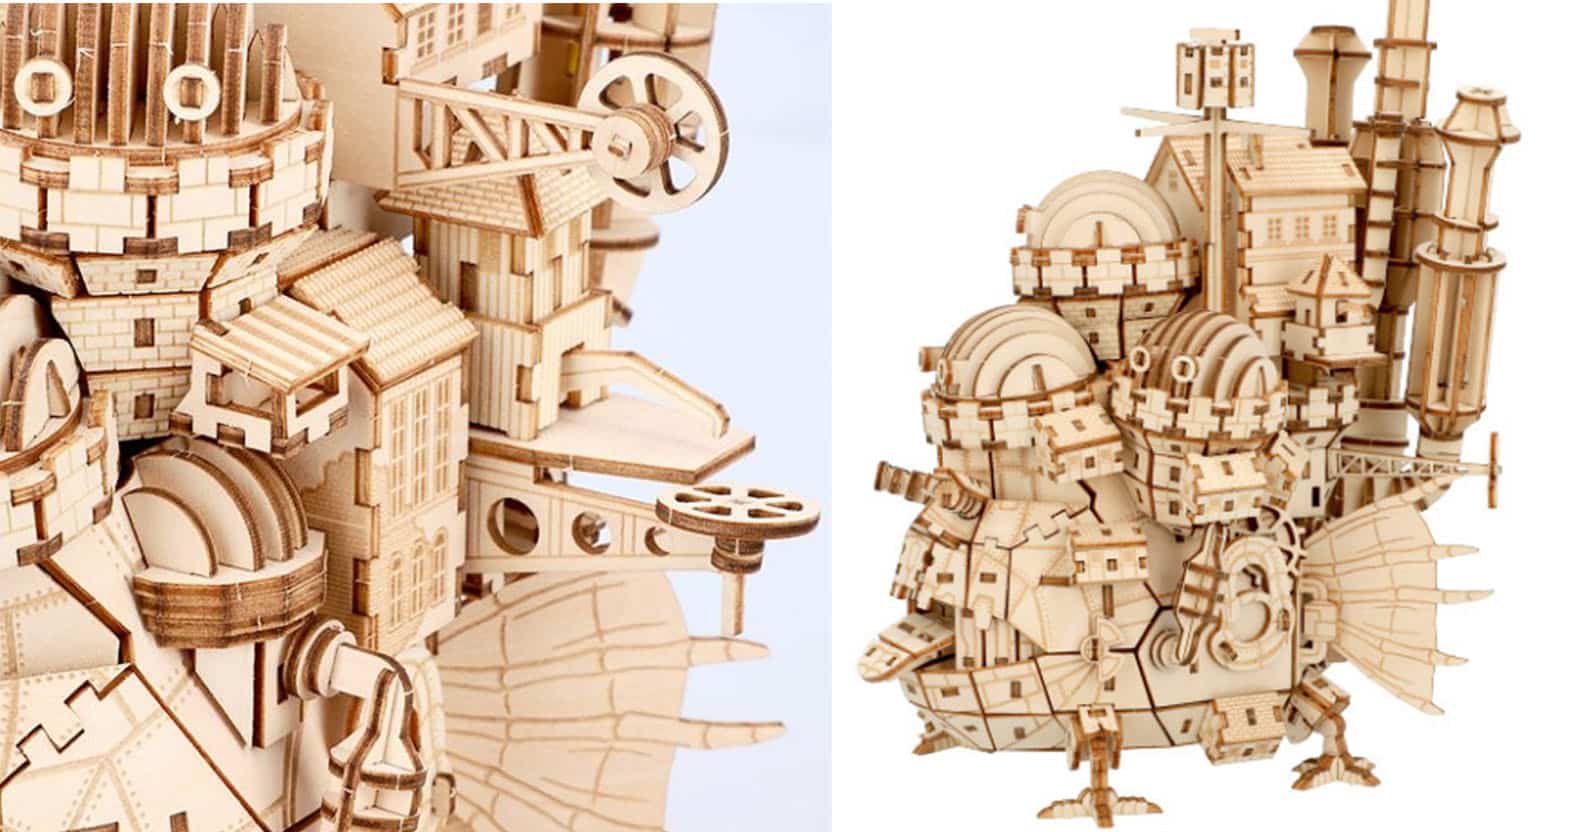 Howl's Moving Castle Wooden Puzzle